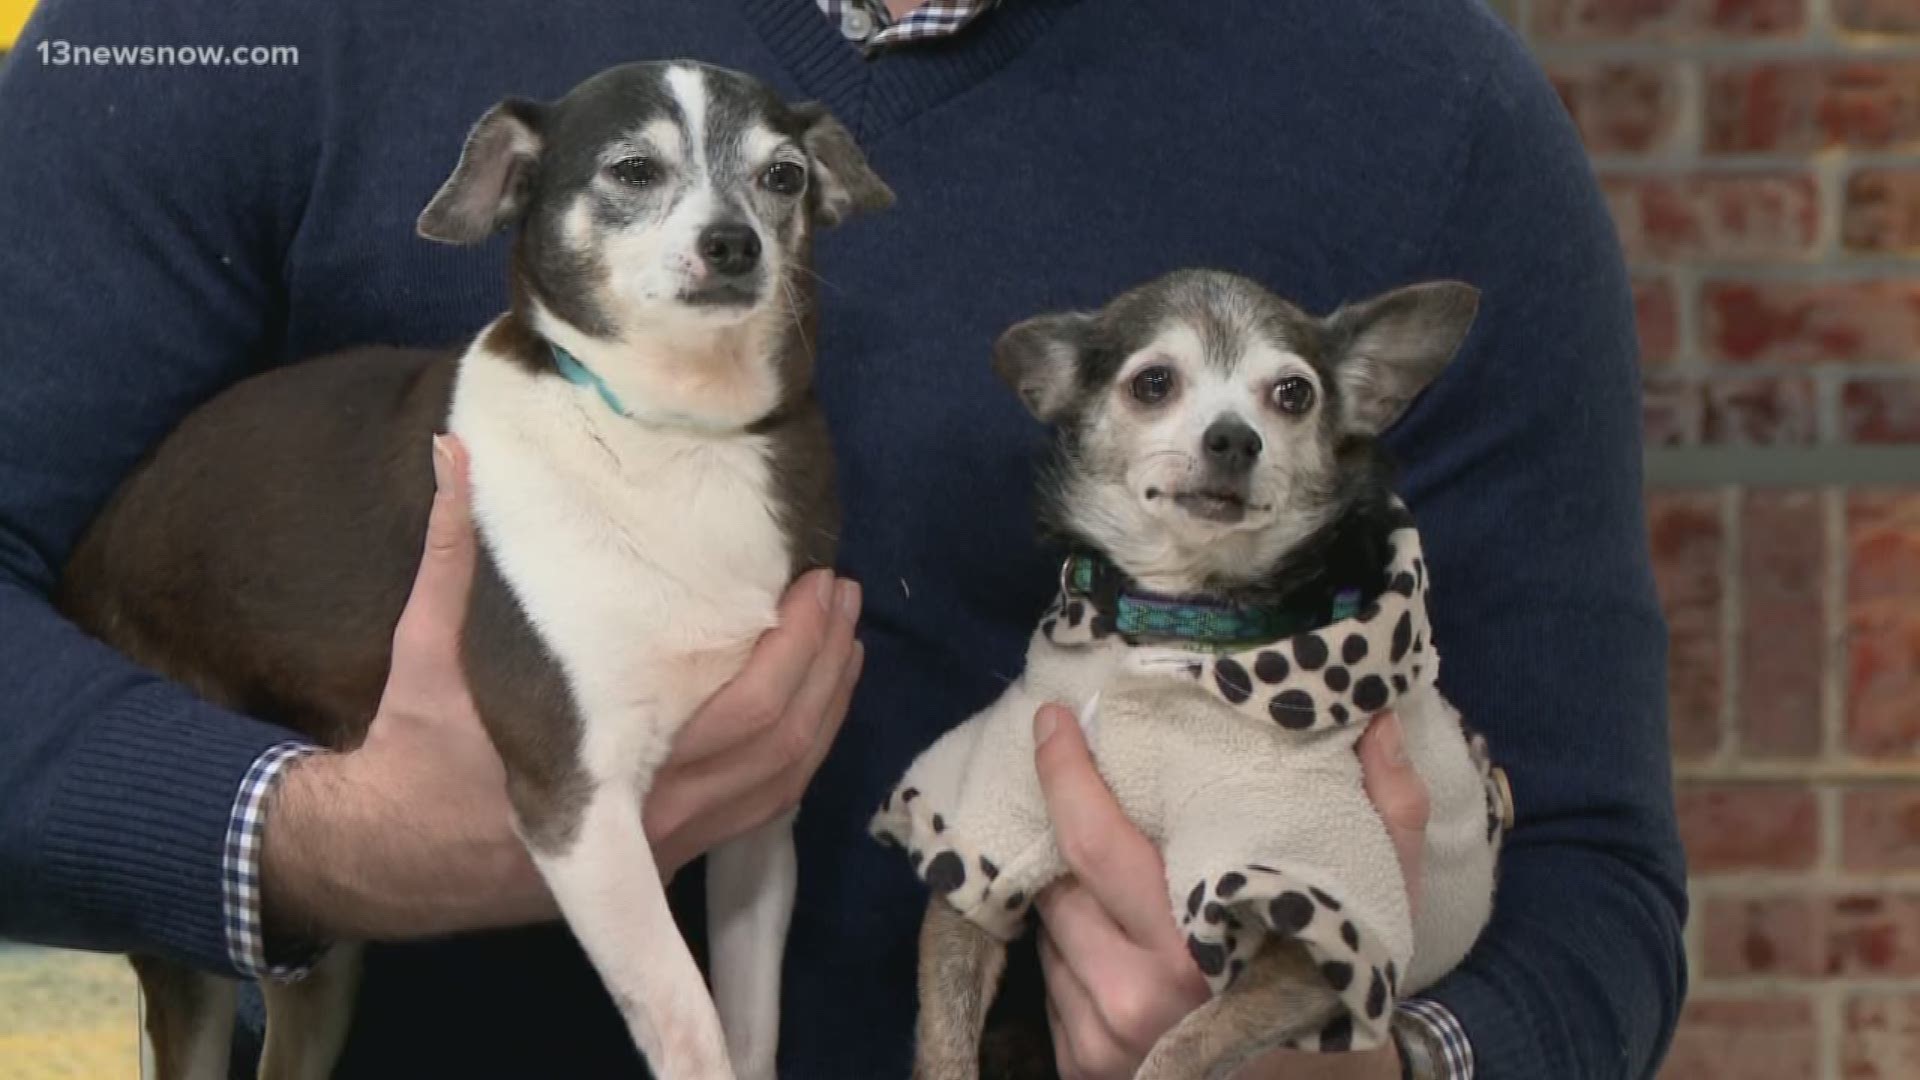 Meet Princess and Turtle who are at the Virginia Beach SPCA -- and are looking for their forever home.